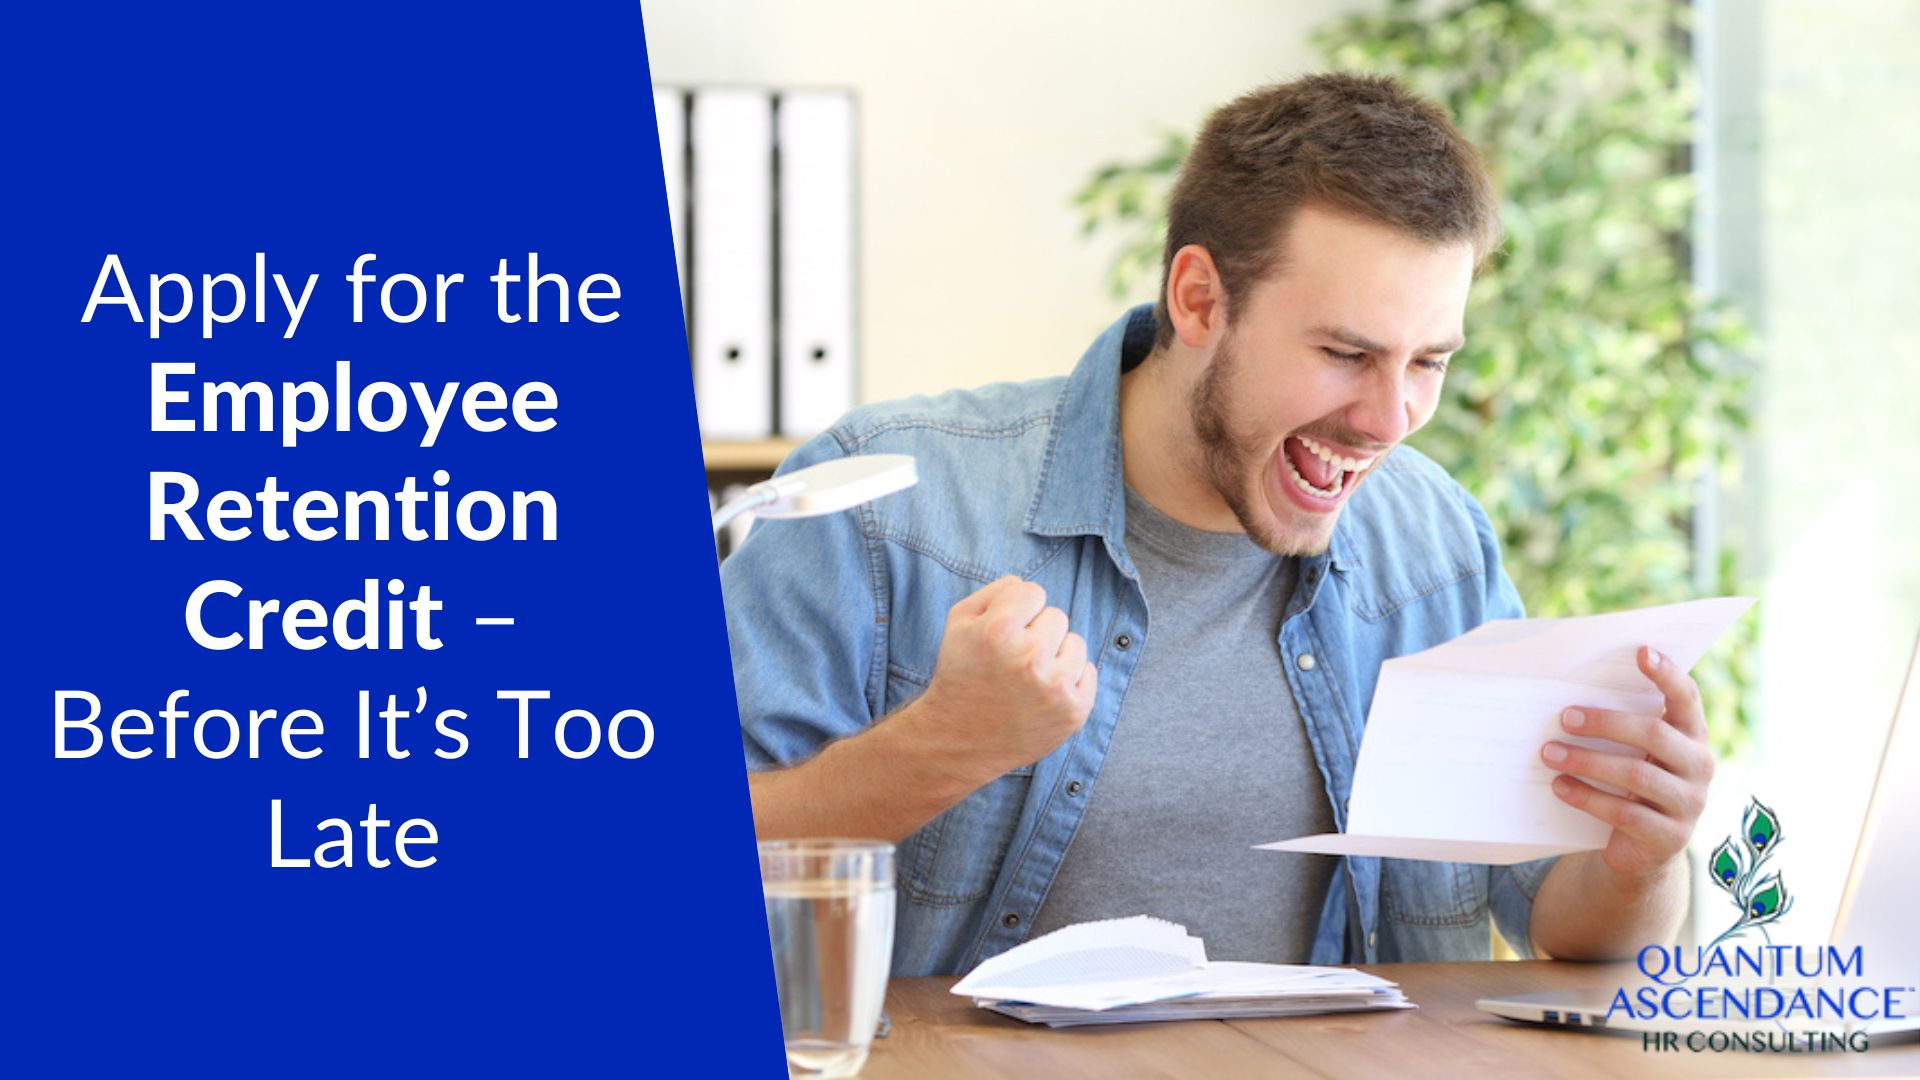 Apply for the Employee Retention Credit Now – Before It’s Too Late